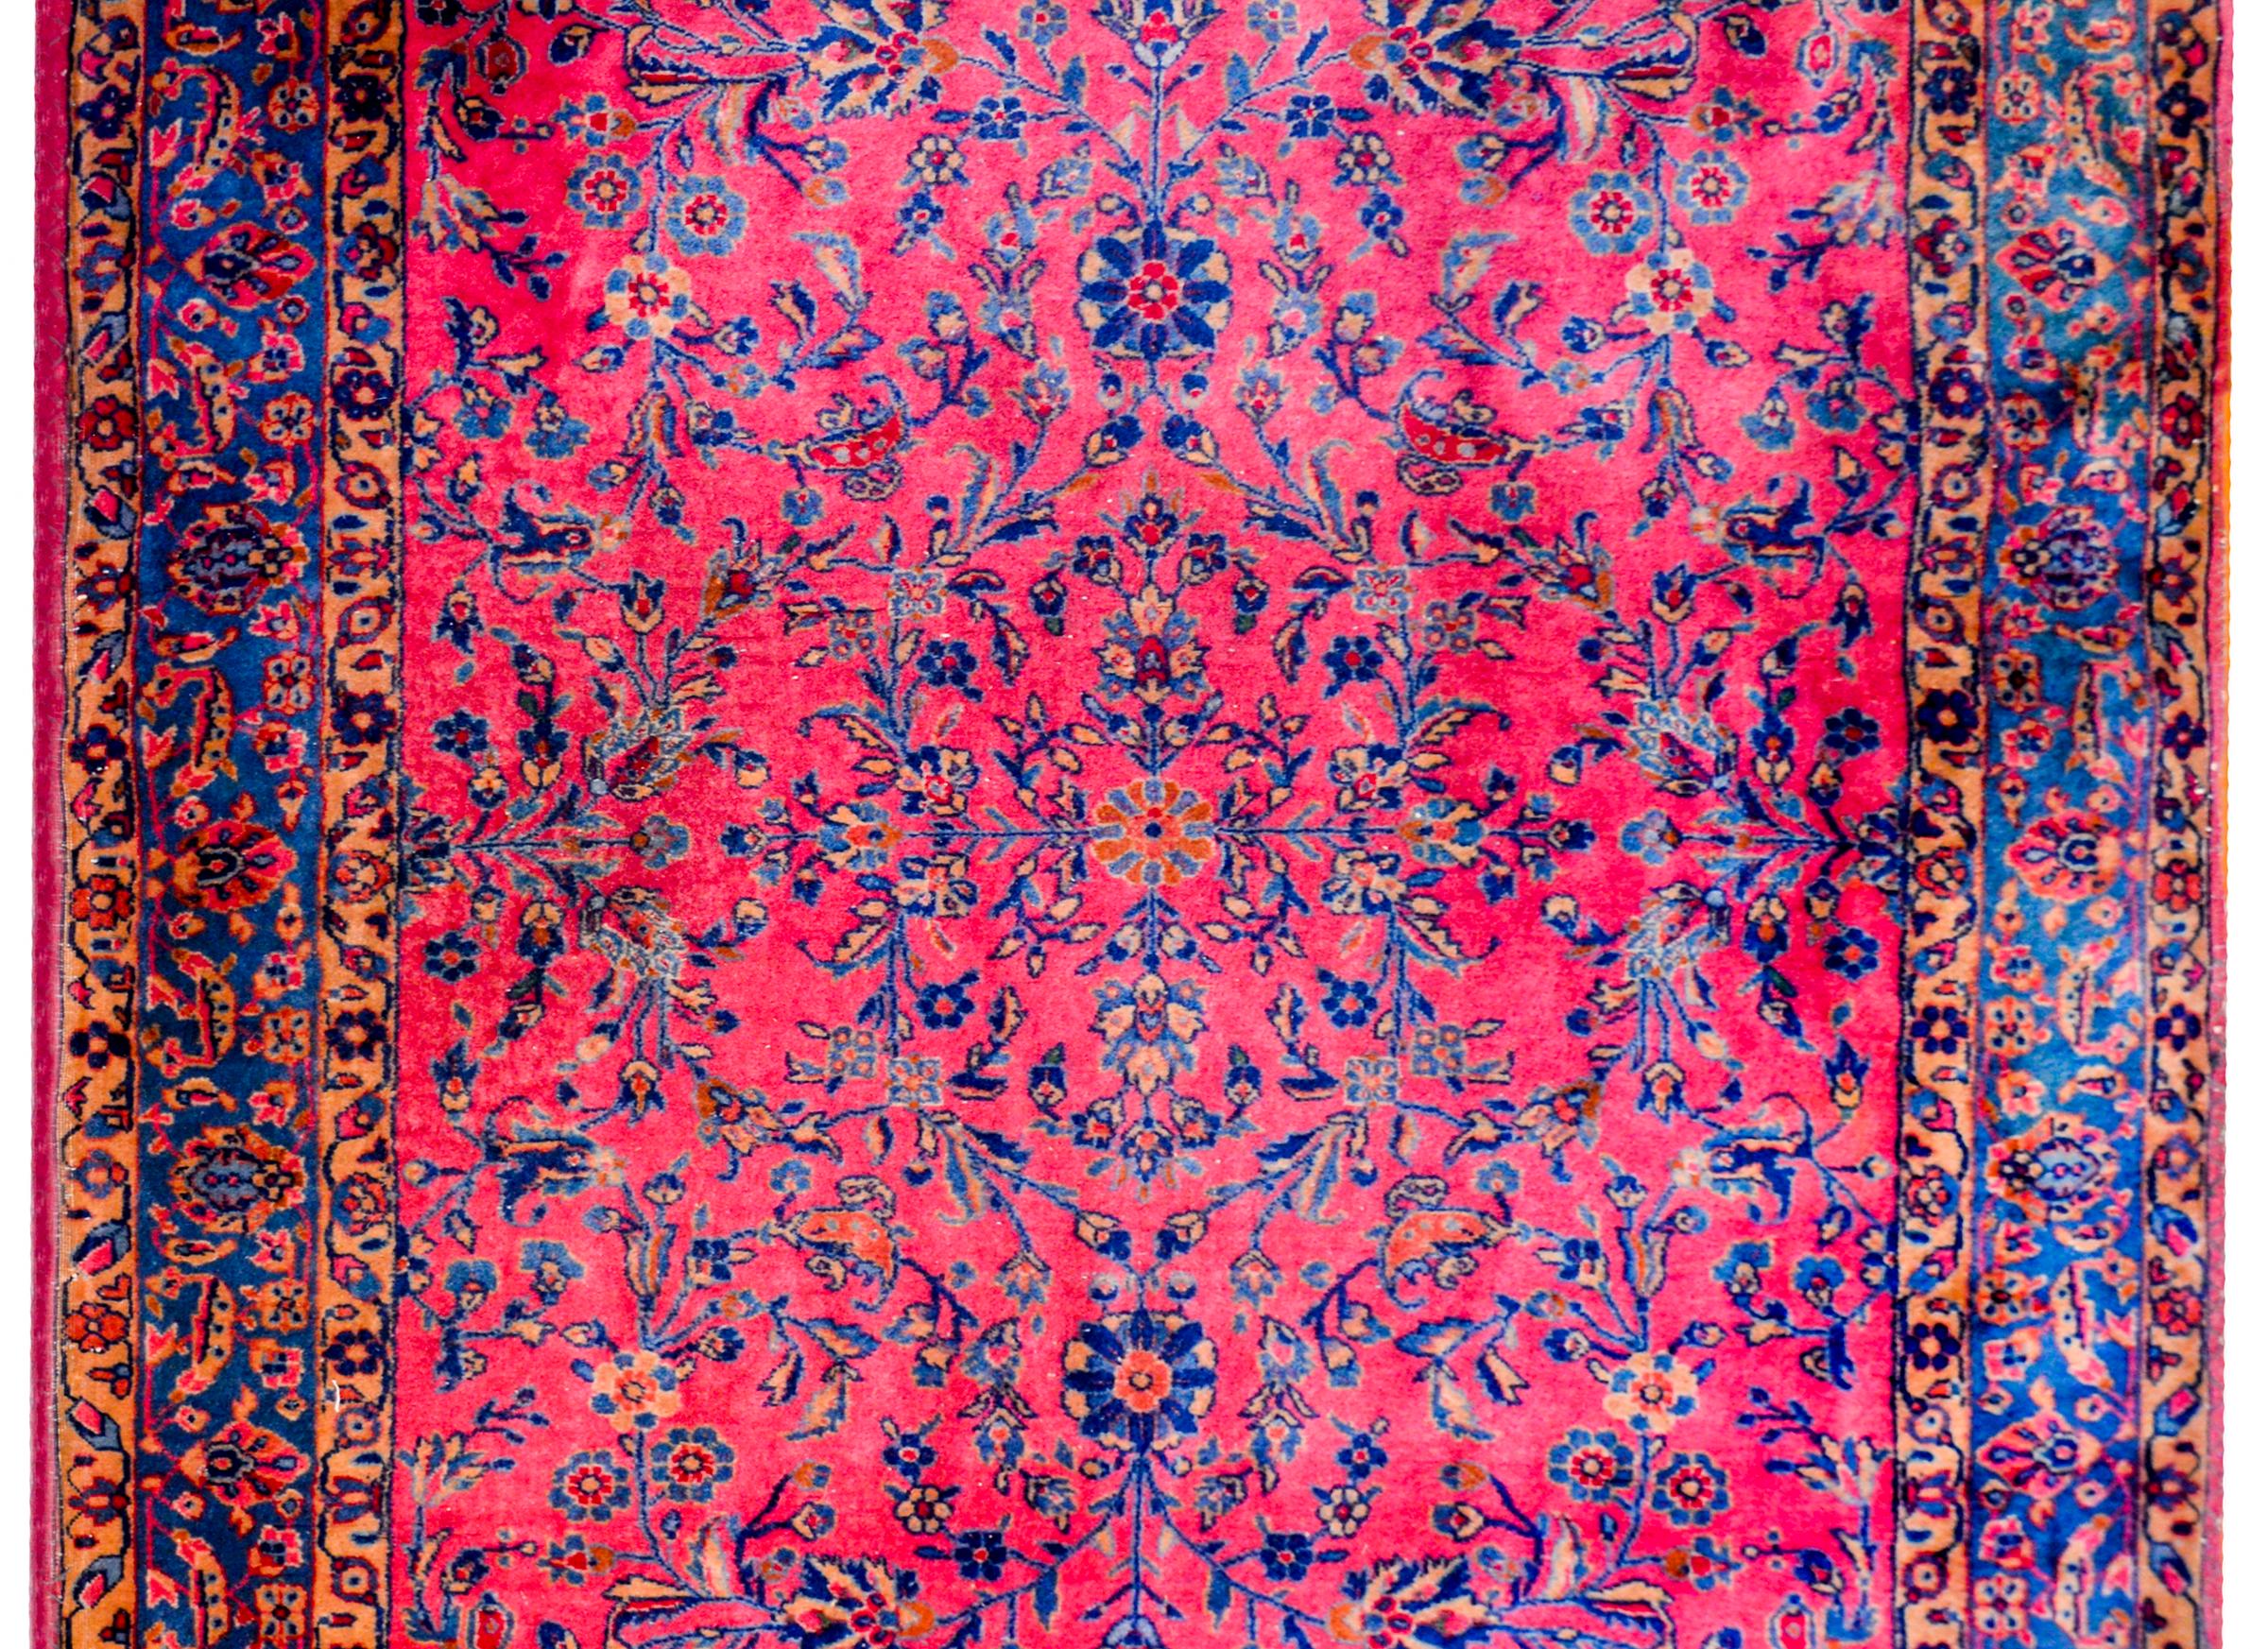 A beautiful early 20th century Persian Kashan rug woven in extremely soft wool from Manchester, England, with a fantastic mirrored floral and scrolling vine pattern and arranged in a way that it created a circular pattern around the central